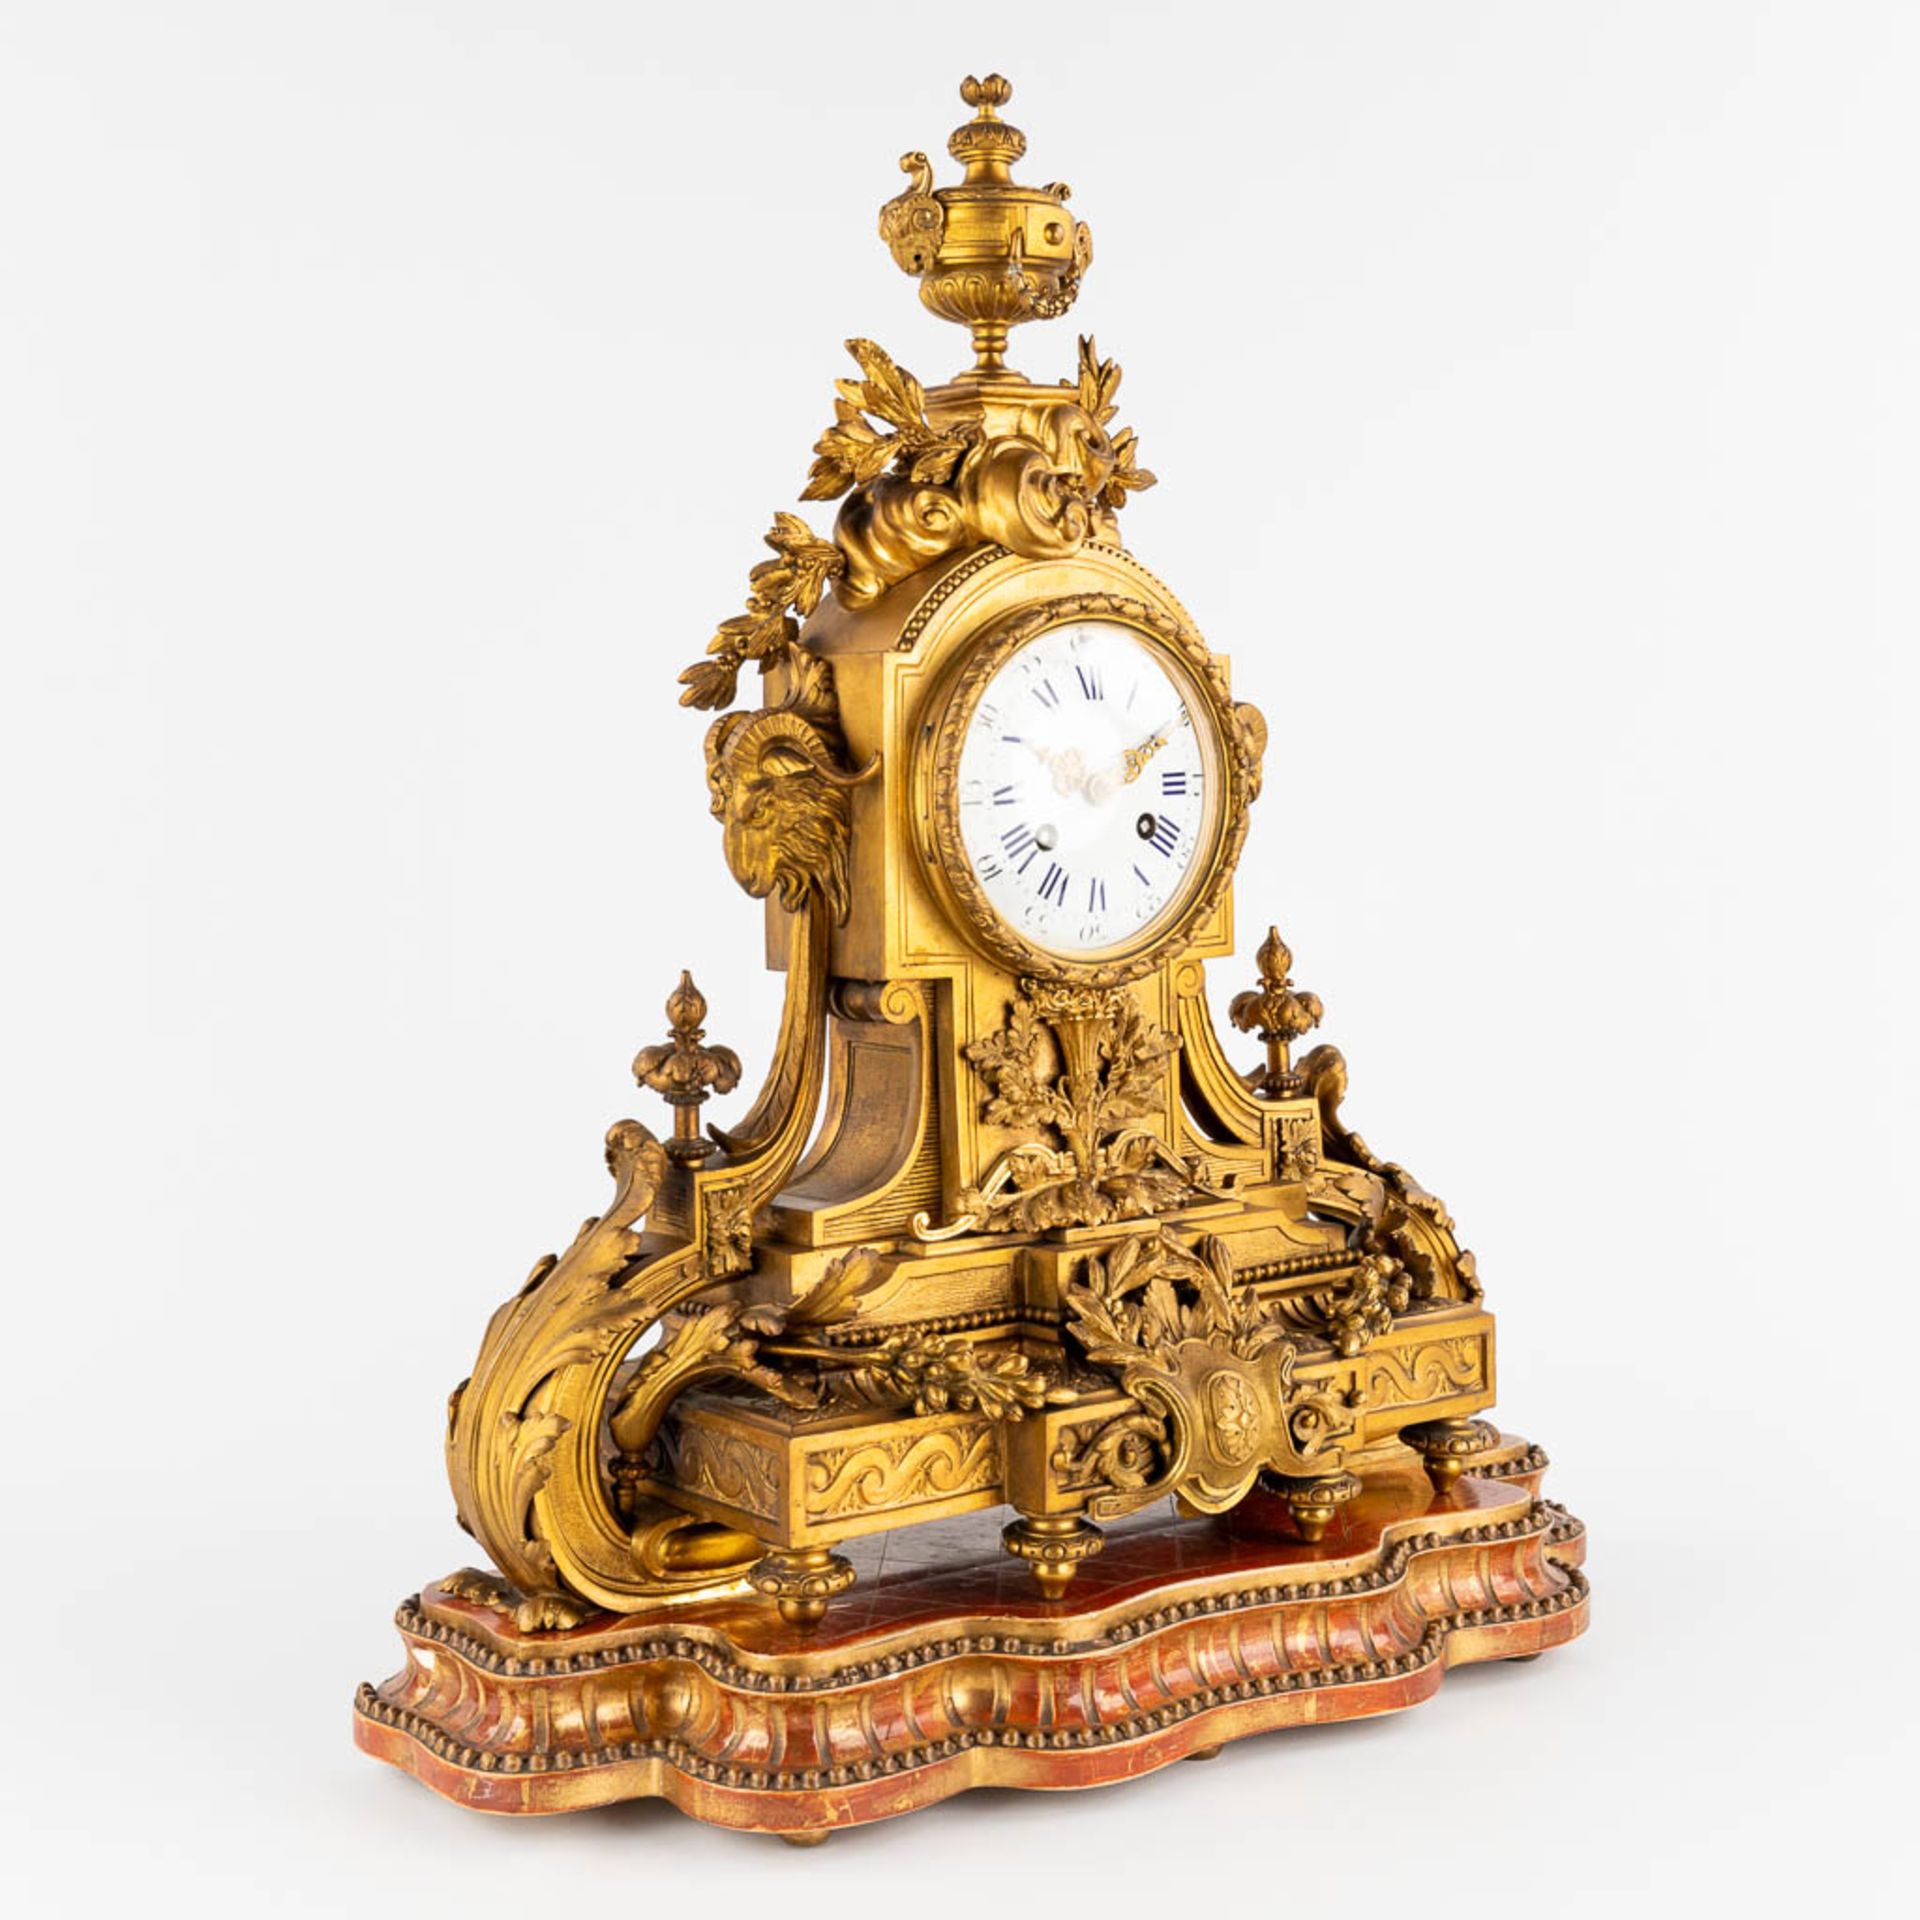 An antique mantle clock, gilt bronze in a Louis XVI style, decorated with ram's heads. Circa 1880. ( - Image 4 of 18